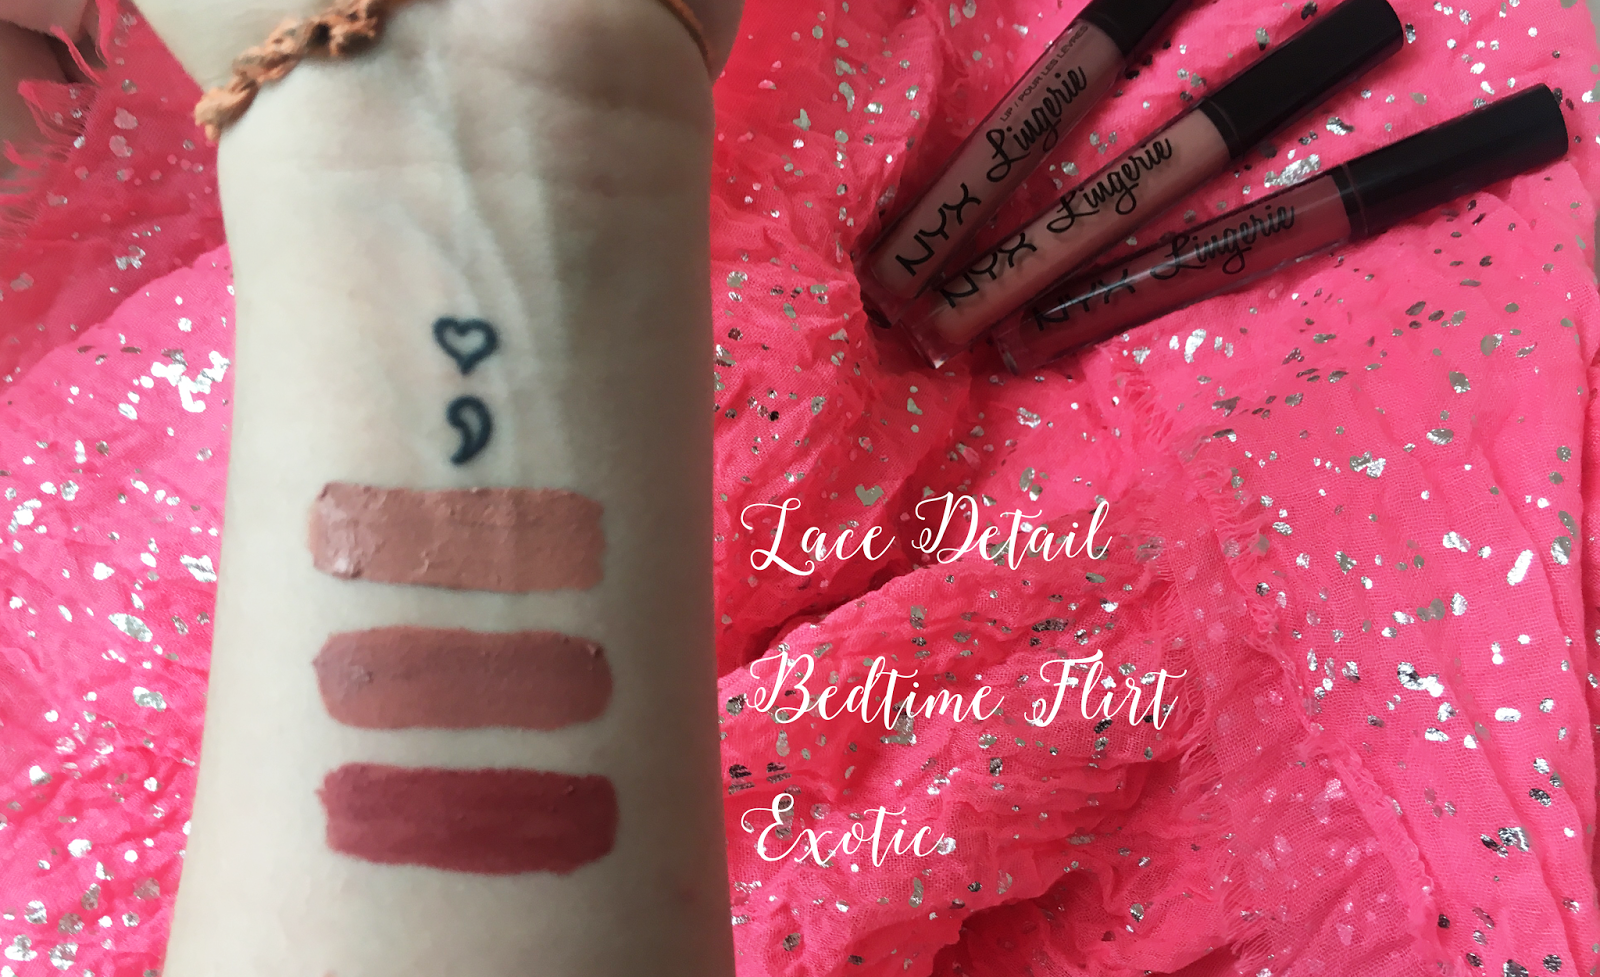 NYX Lingerie Review and Swatches; lace detail, bedtime flirt, and exotic swatches on an arm